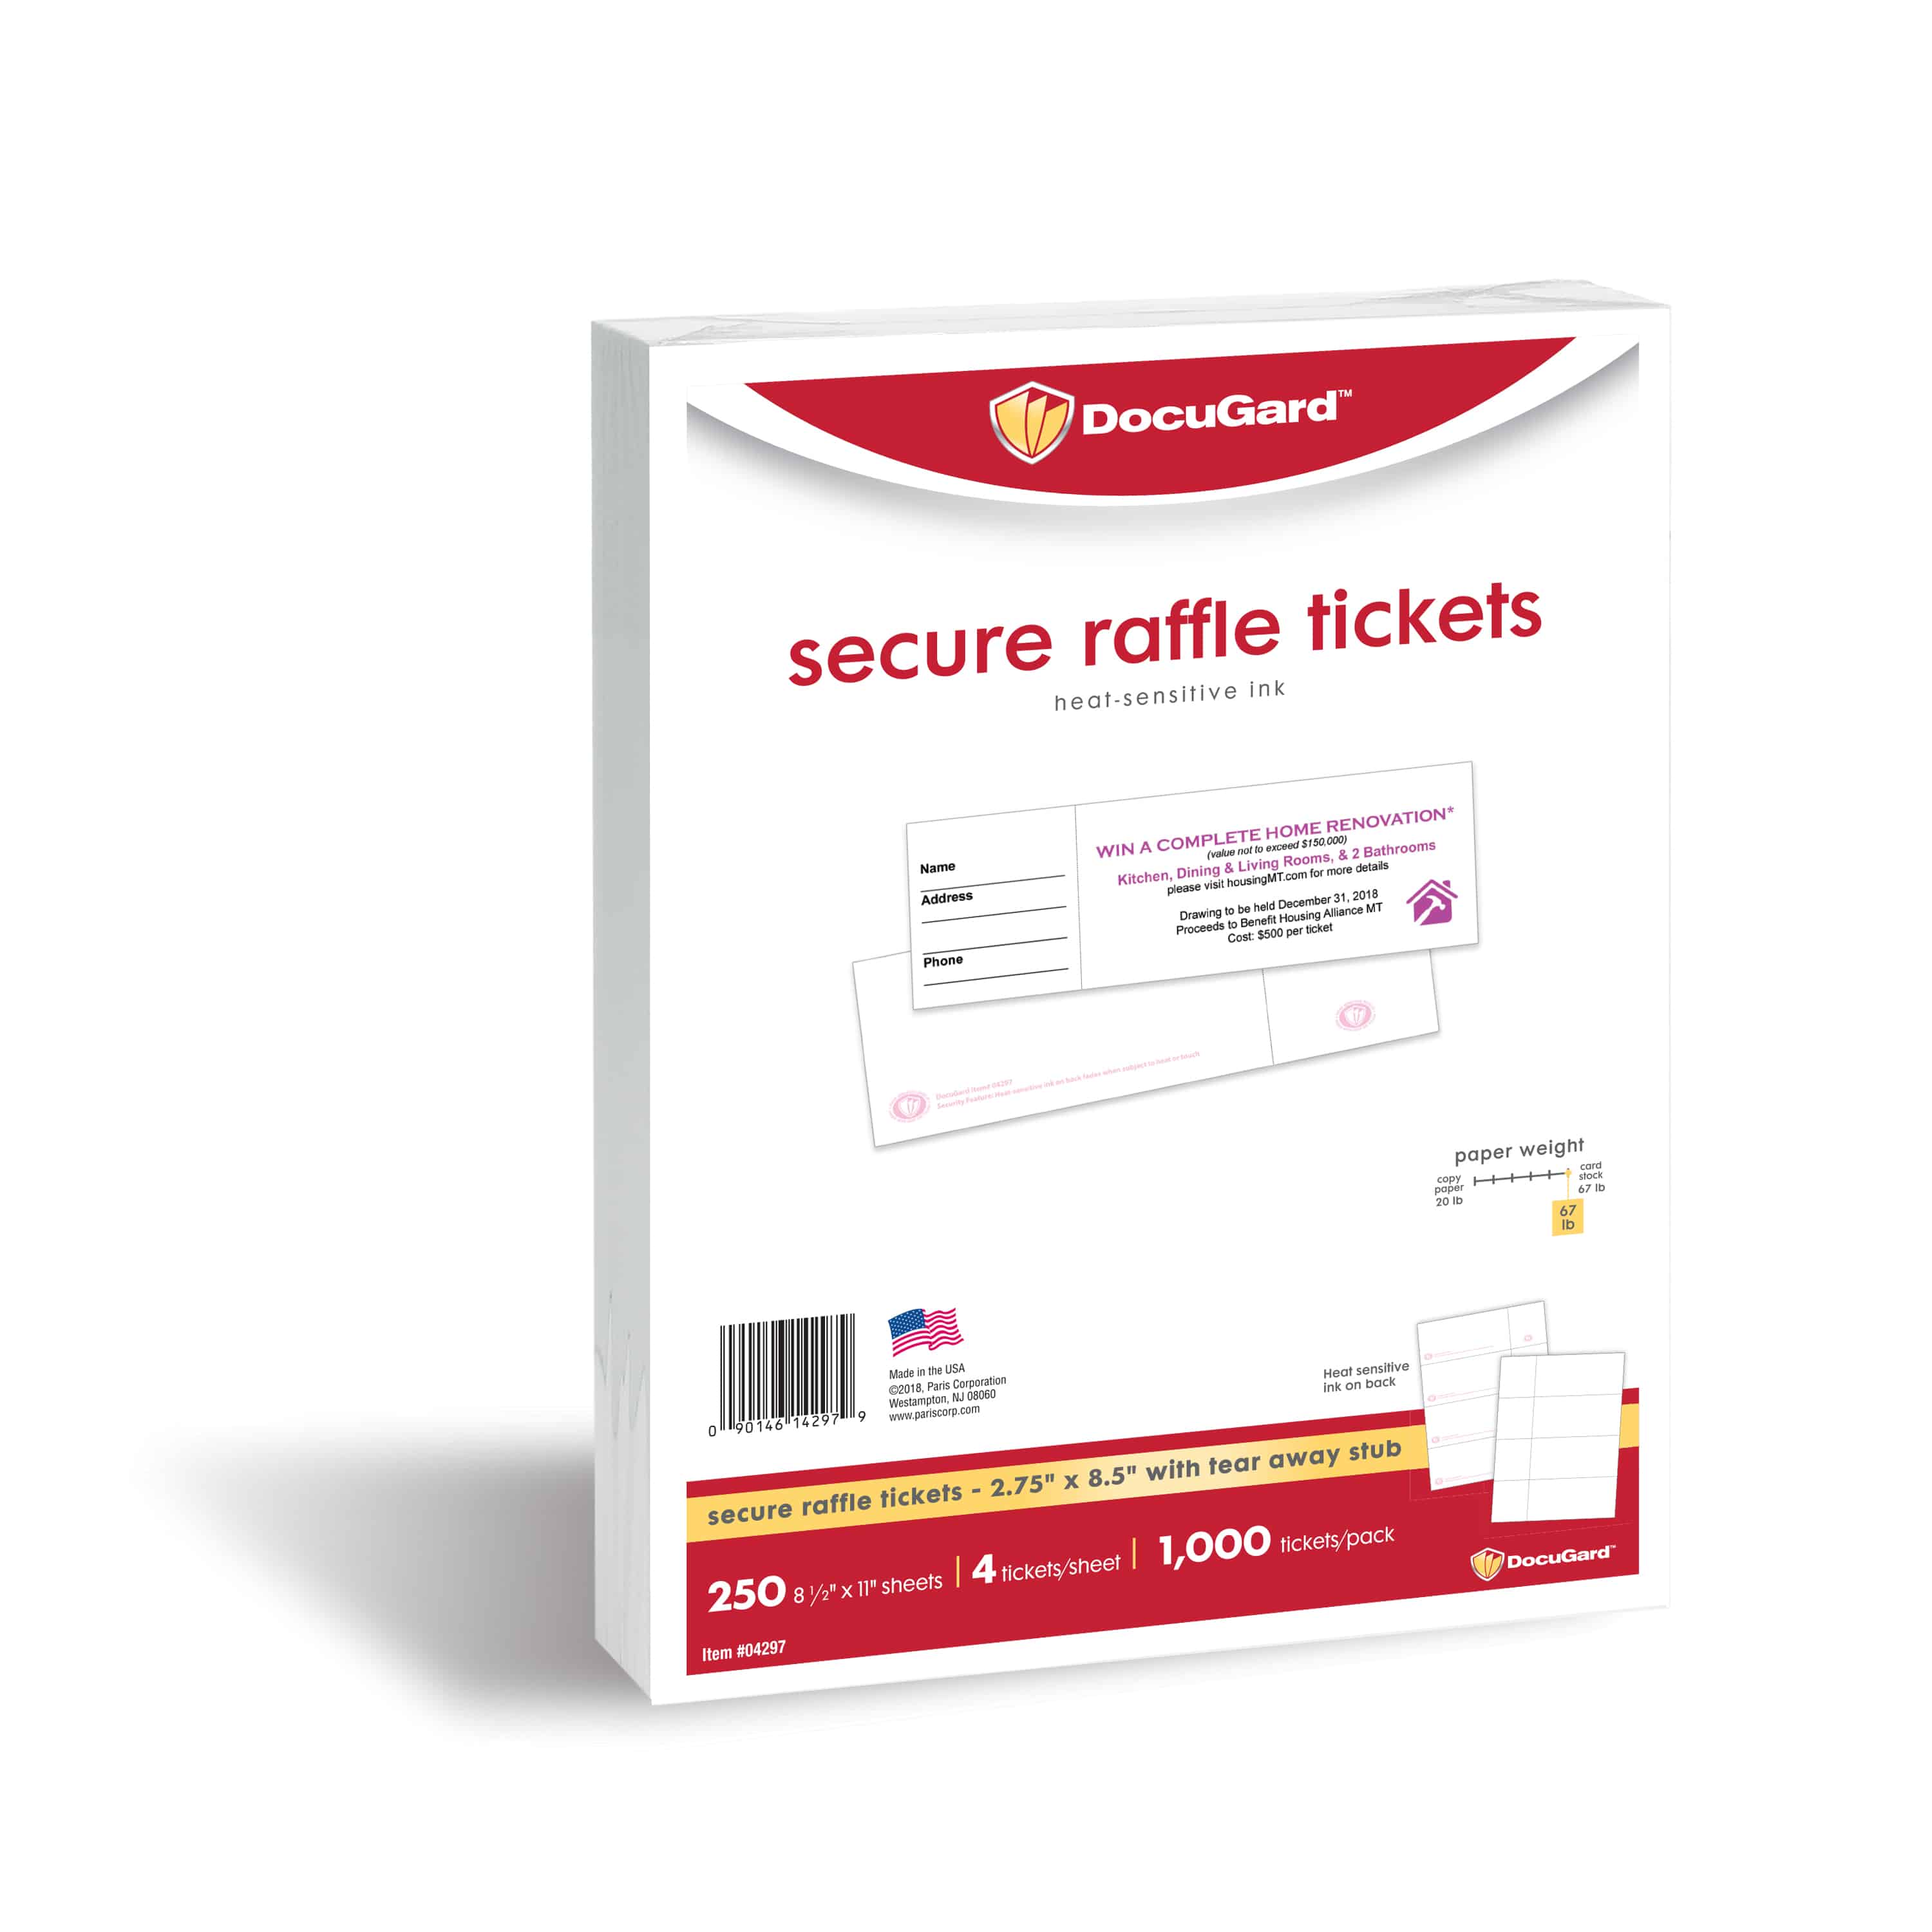 DocuGard, security paper, tamper resistant, fraud protection, raffle tickets, secure raffle tickets, security features